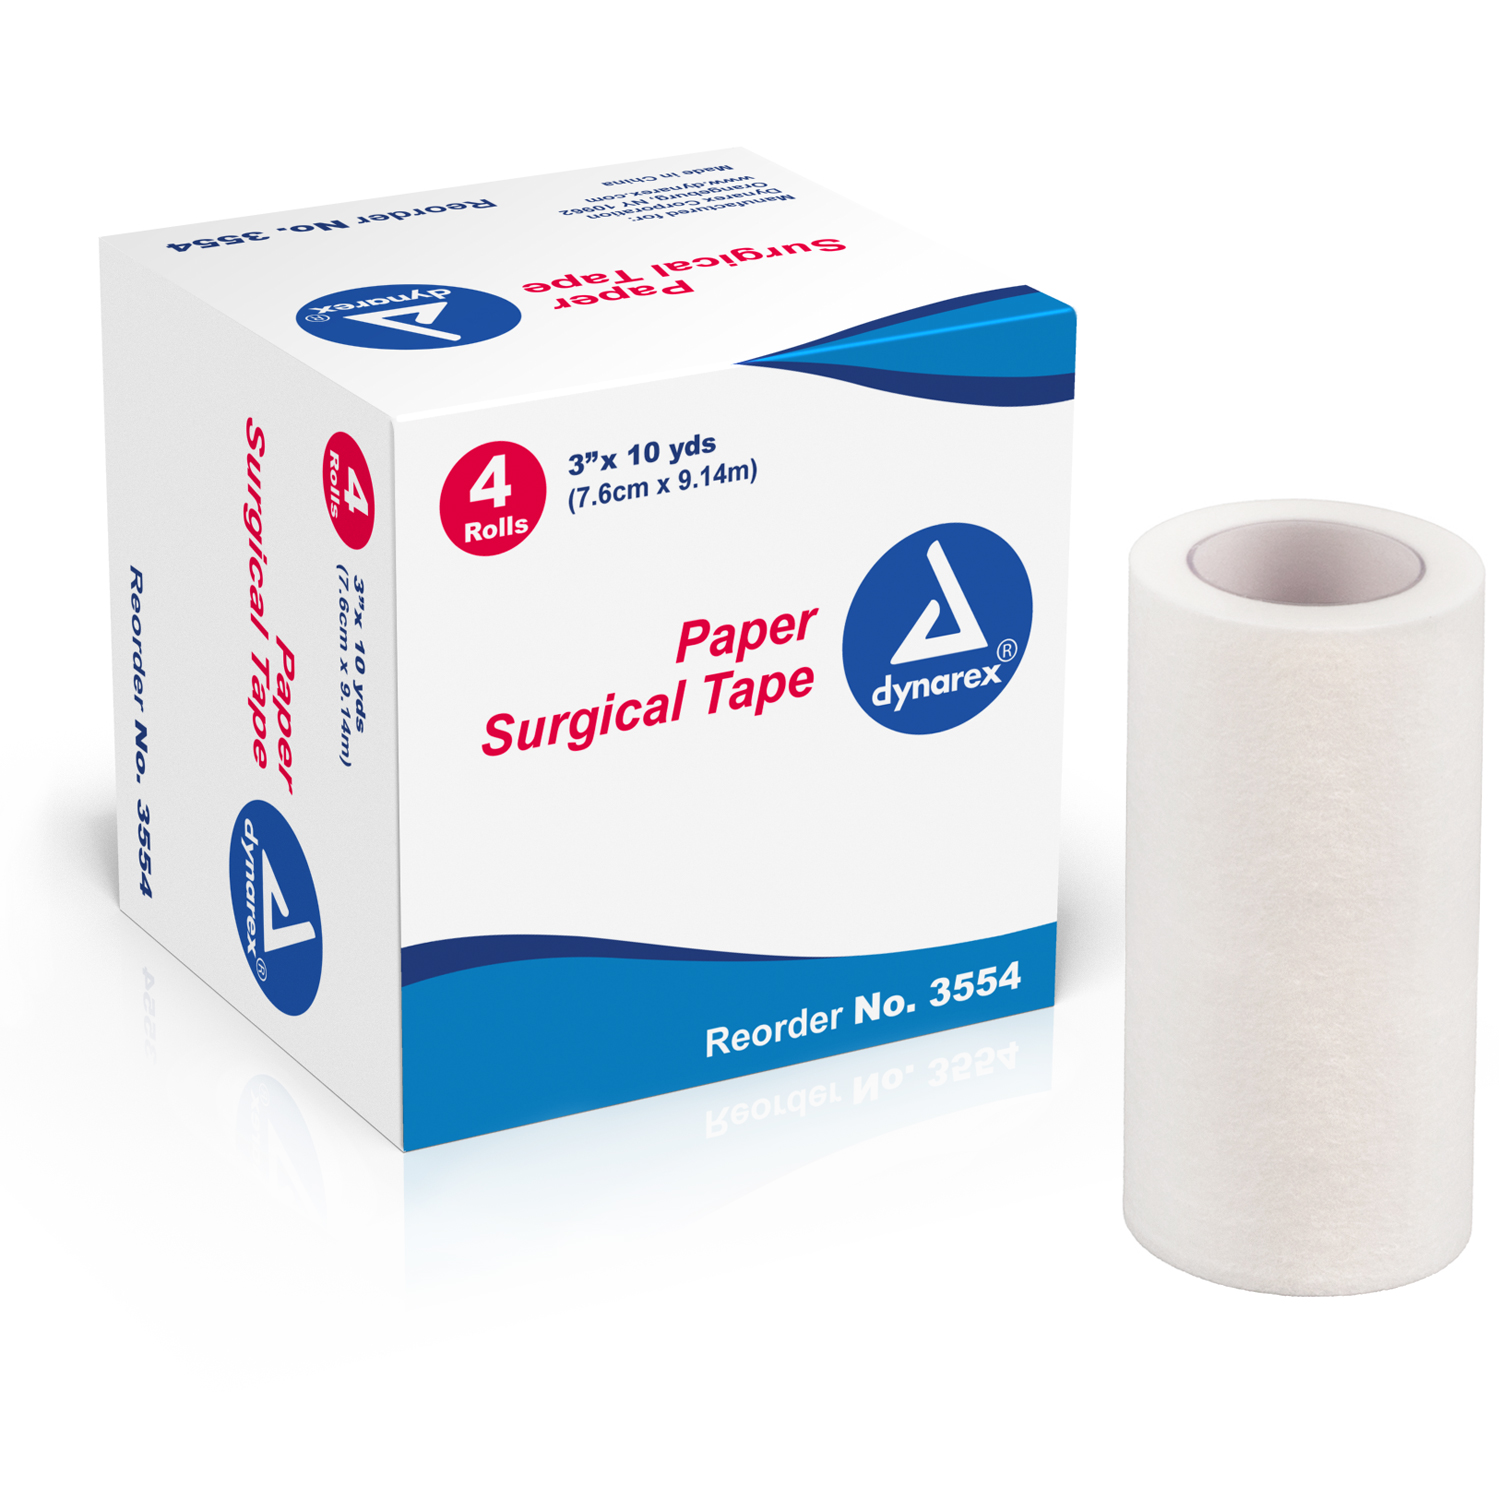 Paper Surgical Tape - 3" x 10 yds